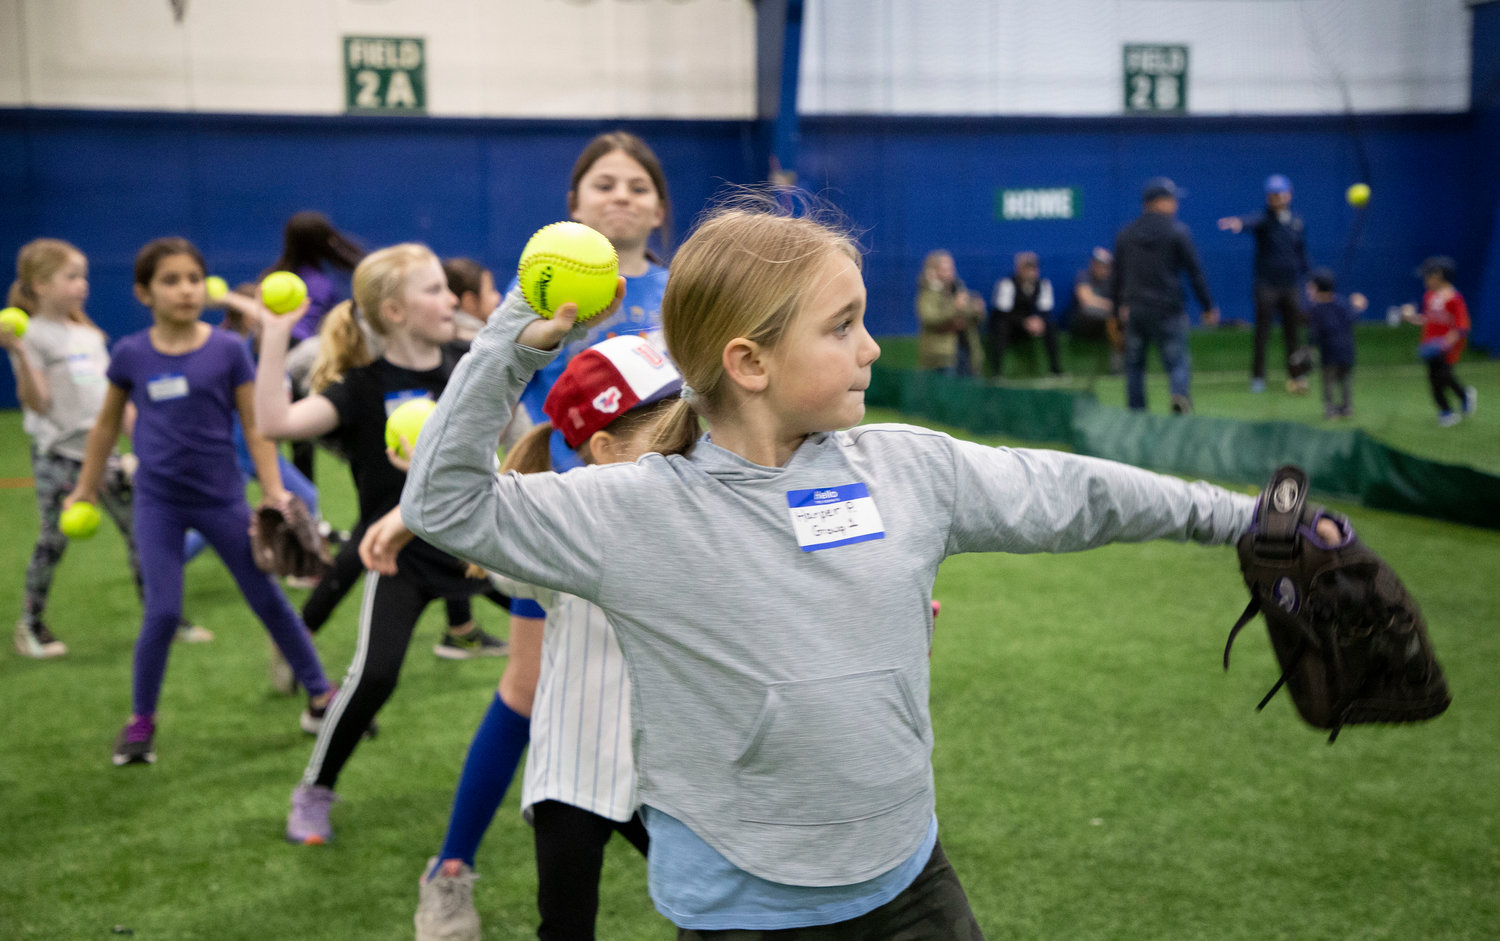 A large group of local Little Leaguers attended the event, which was held at TeamWorks in Seekonk.